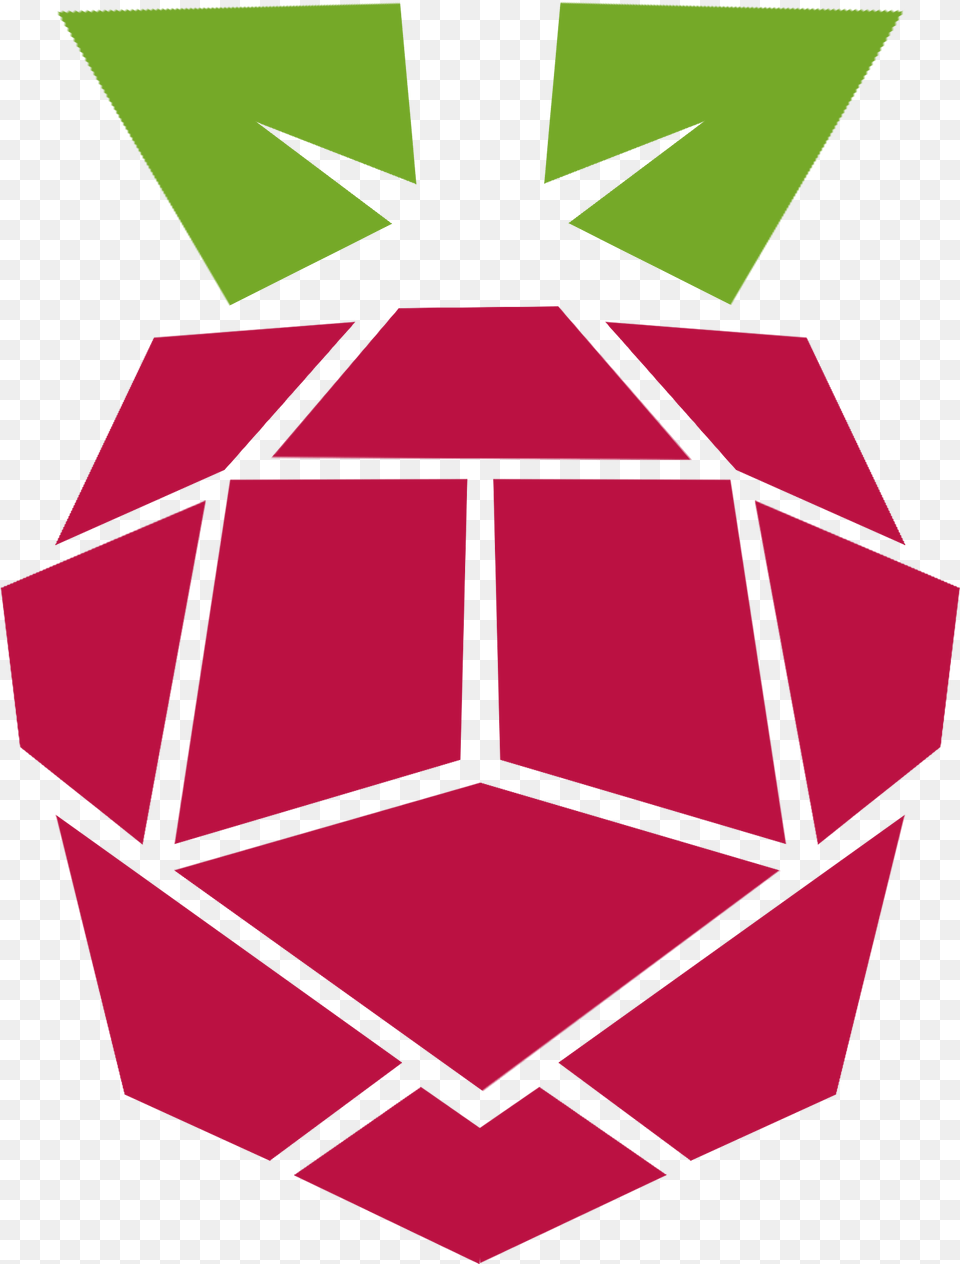 Raspberry Pi Logo For My Project Raspberry Pi Background Hd, Food, Fruit, Plant, Produce Free Transparent Png